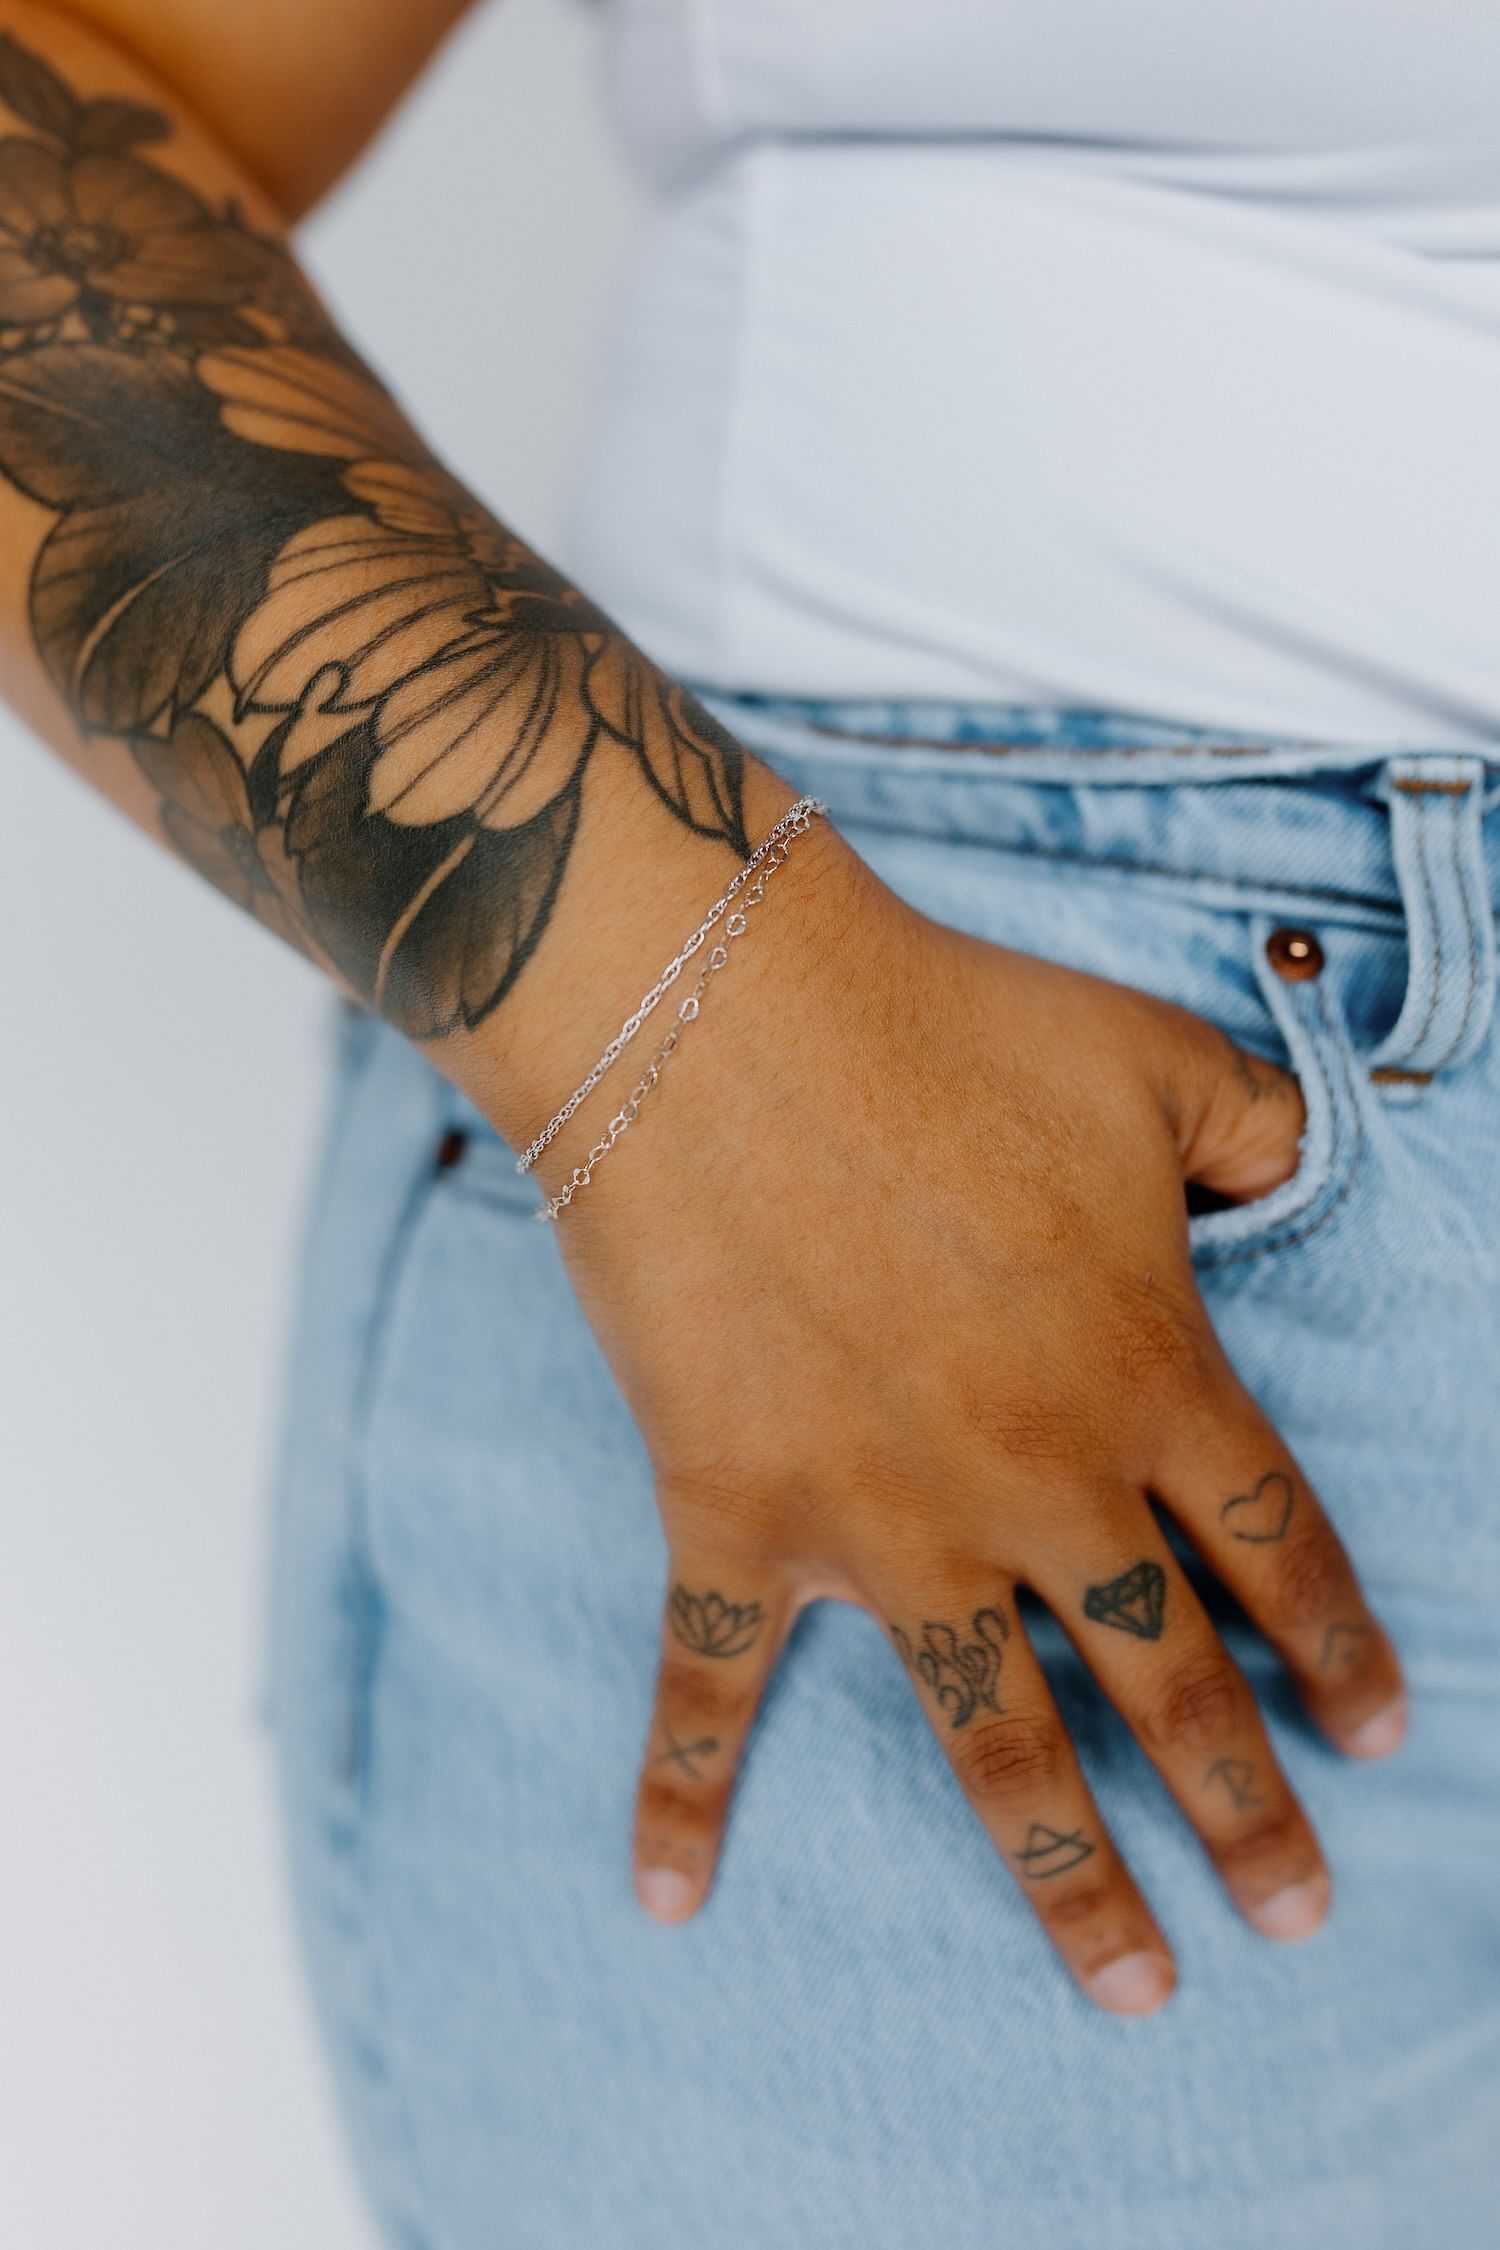 Person with floral tattoo on arm, wearing silver bracelet and jeans, hand in pocket.